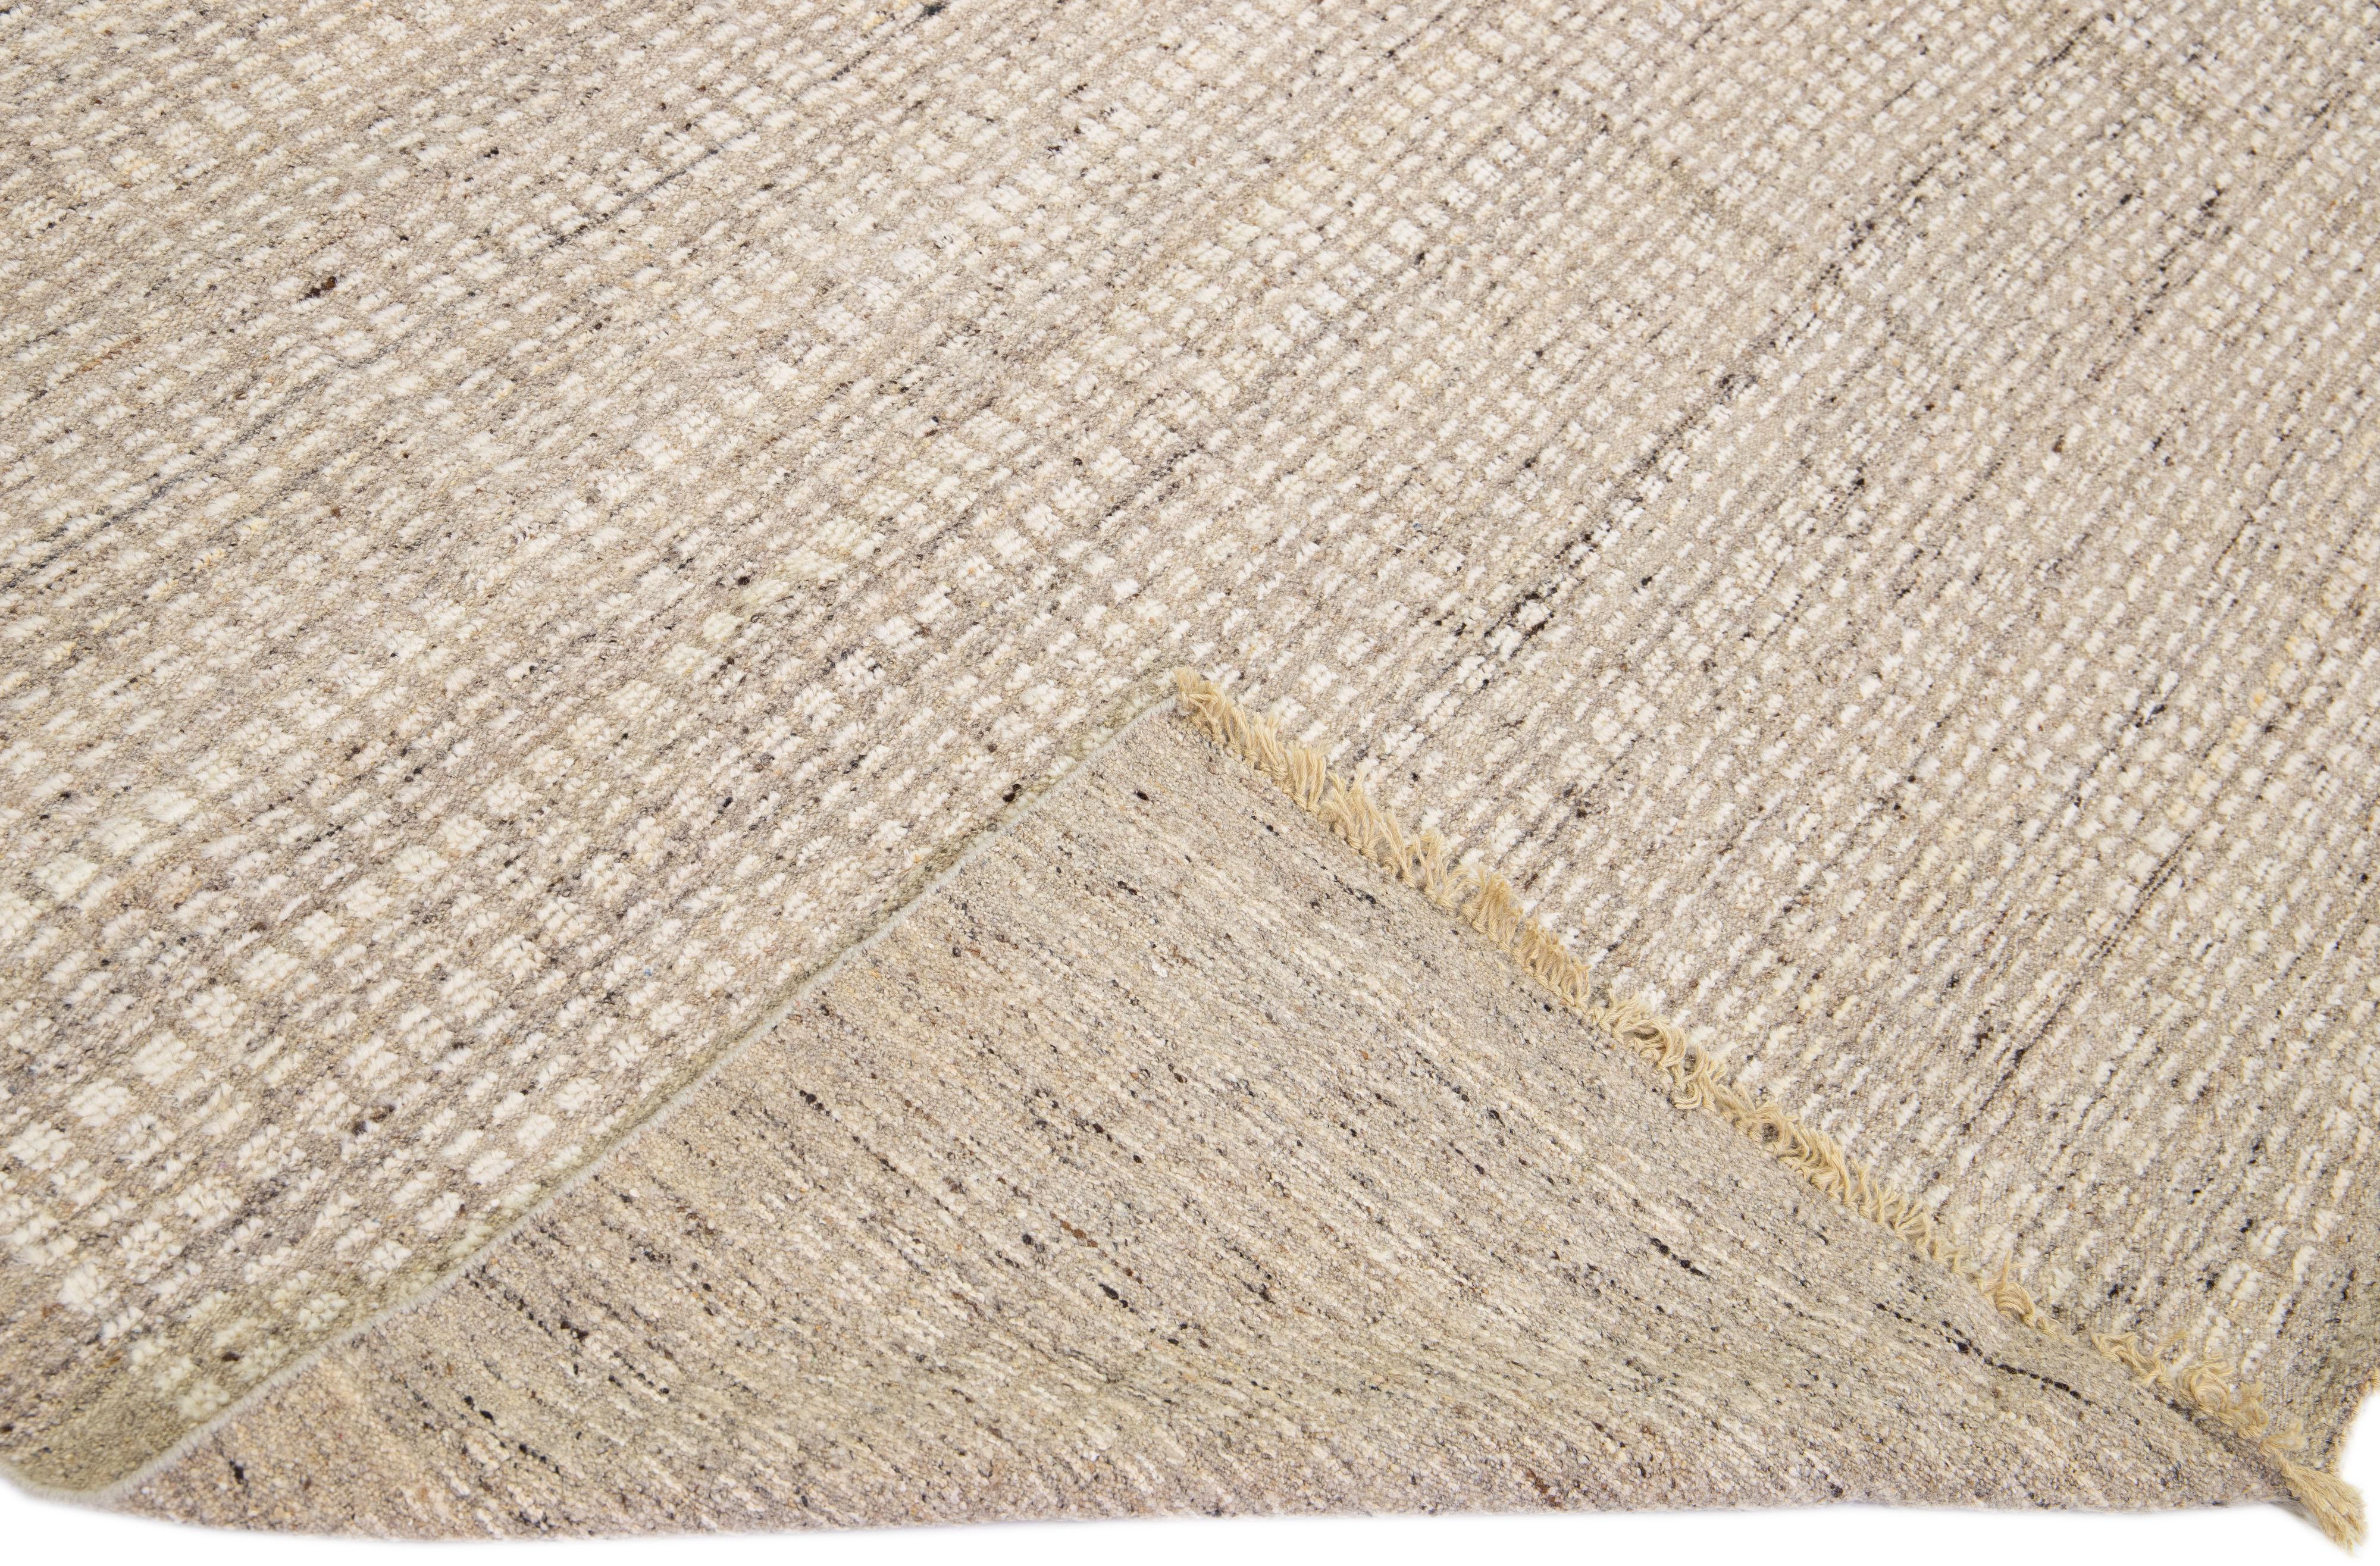 Beautiful modern Moroccan style hand-knotted wool rug with a beige field. This piece has a gorgeous subtle geometric pattern design.

This rug measures: 9'4